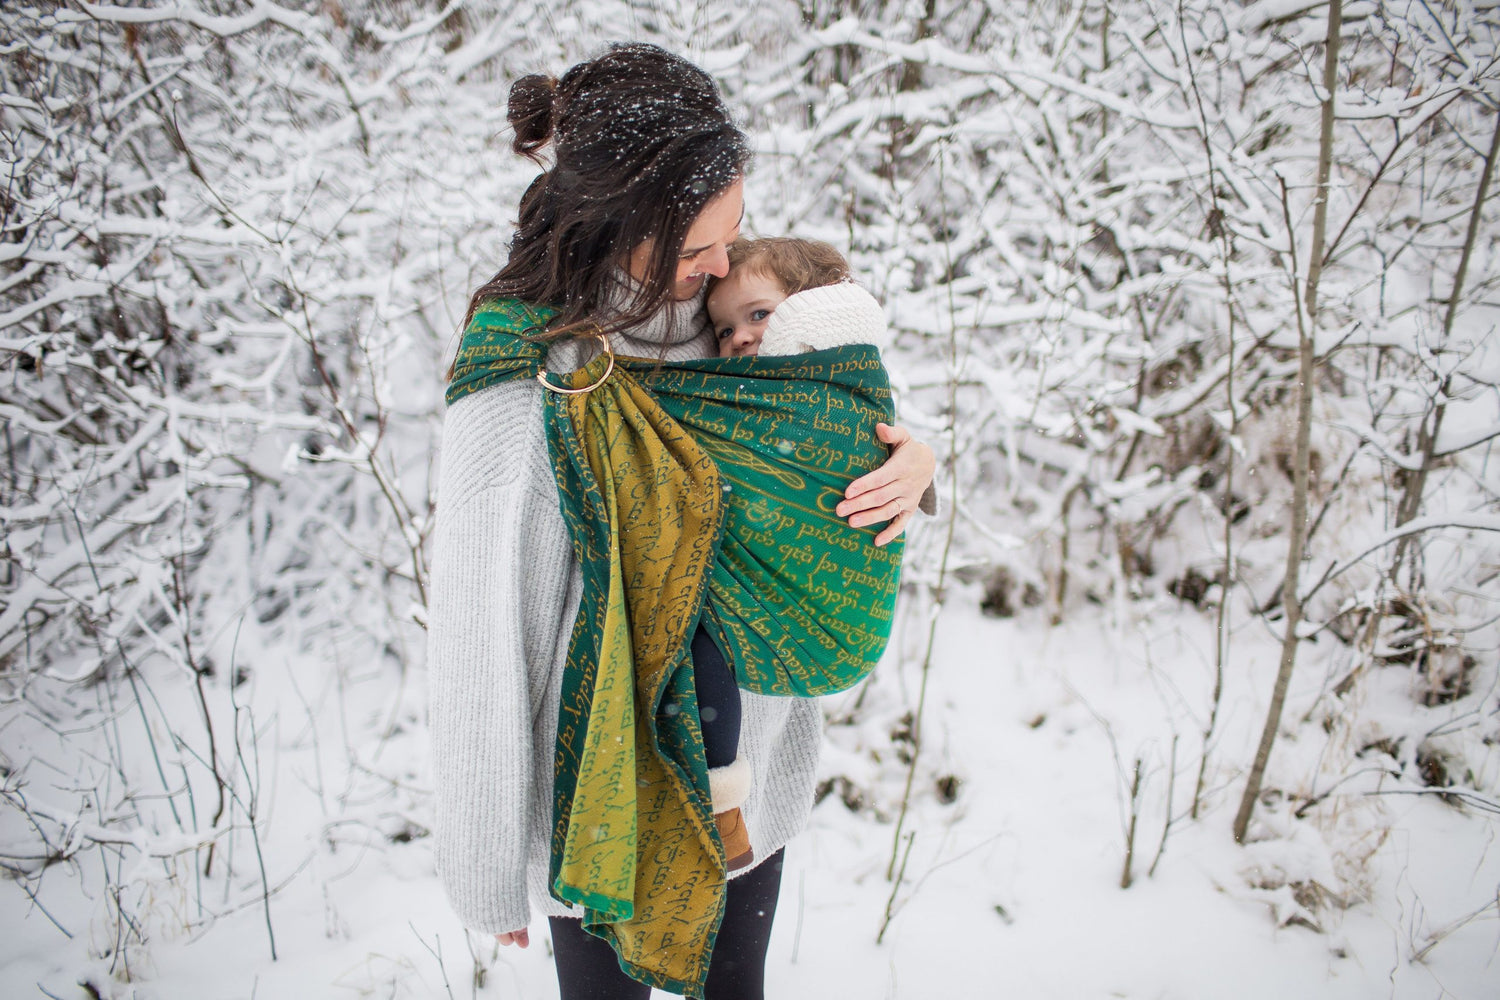 Customer Stories: Is it OK to ask for a baby sling as a gift?